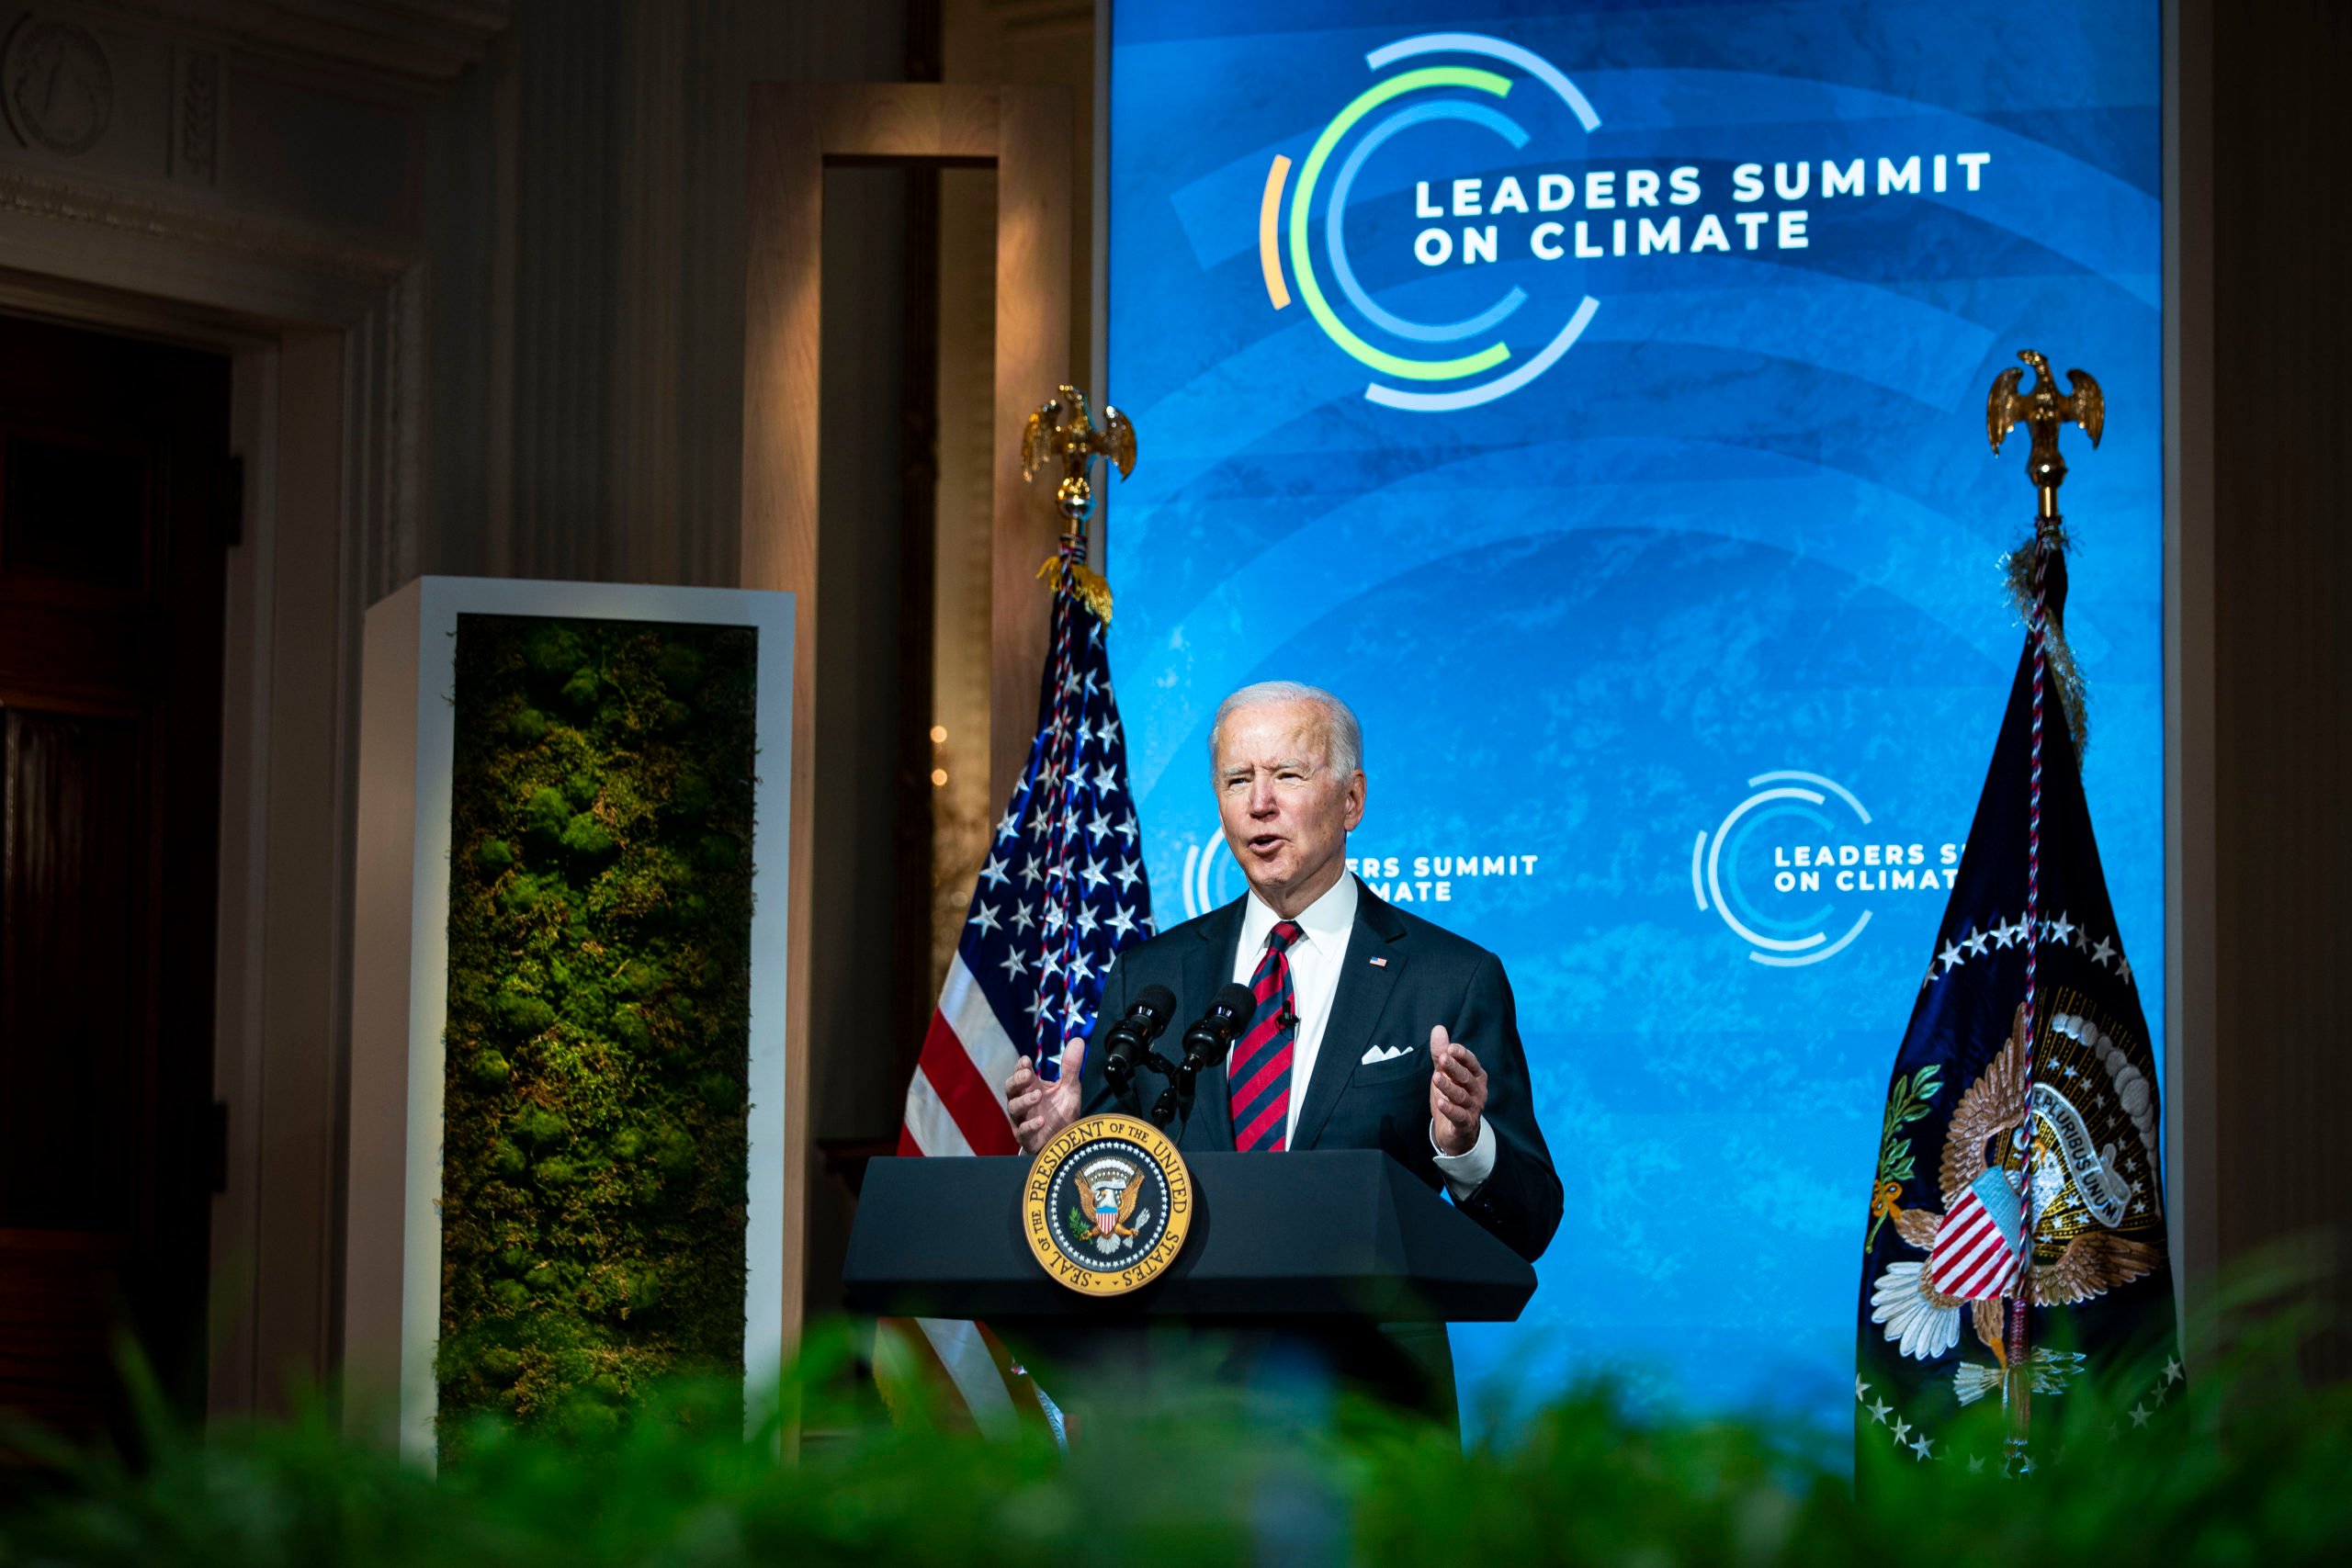 President Joe Biden delivers remarks during the virtual Leaders Summit on Climate with 40 world leaders at the at the White House on April 22. (Al Drago/Pool/Getty Images)